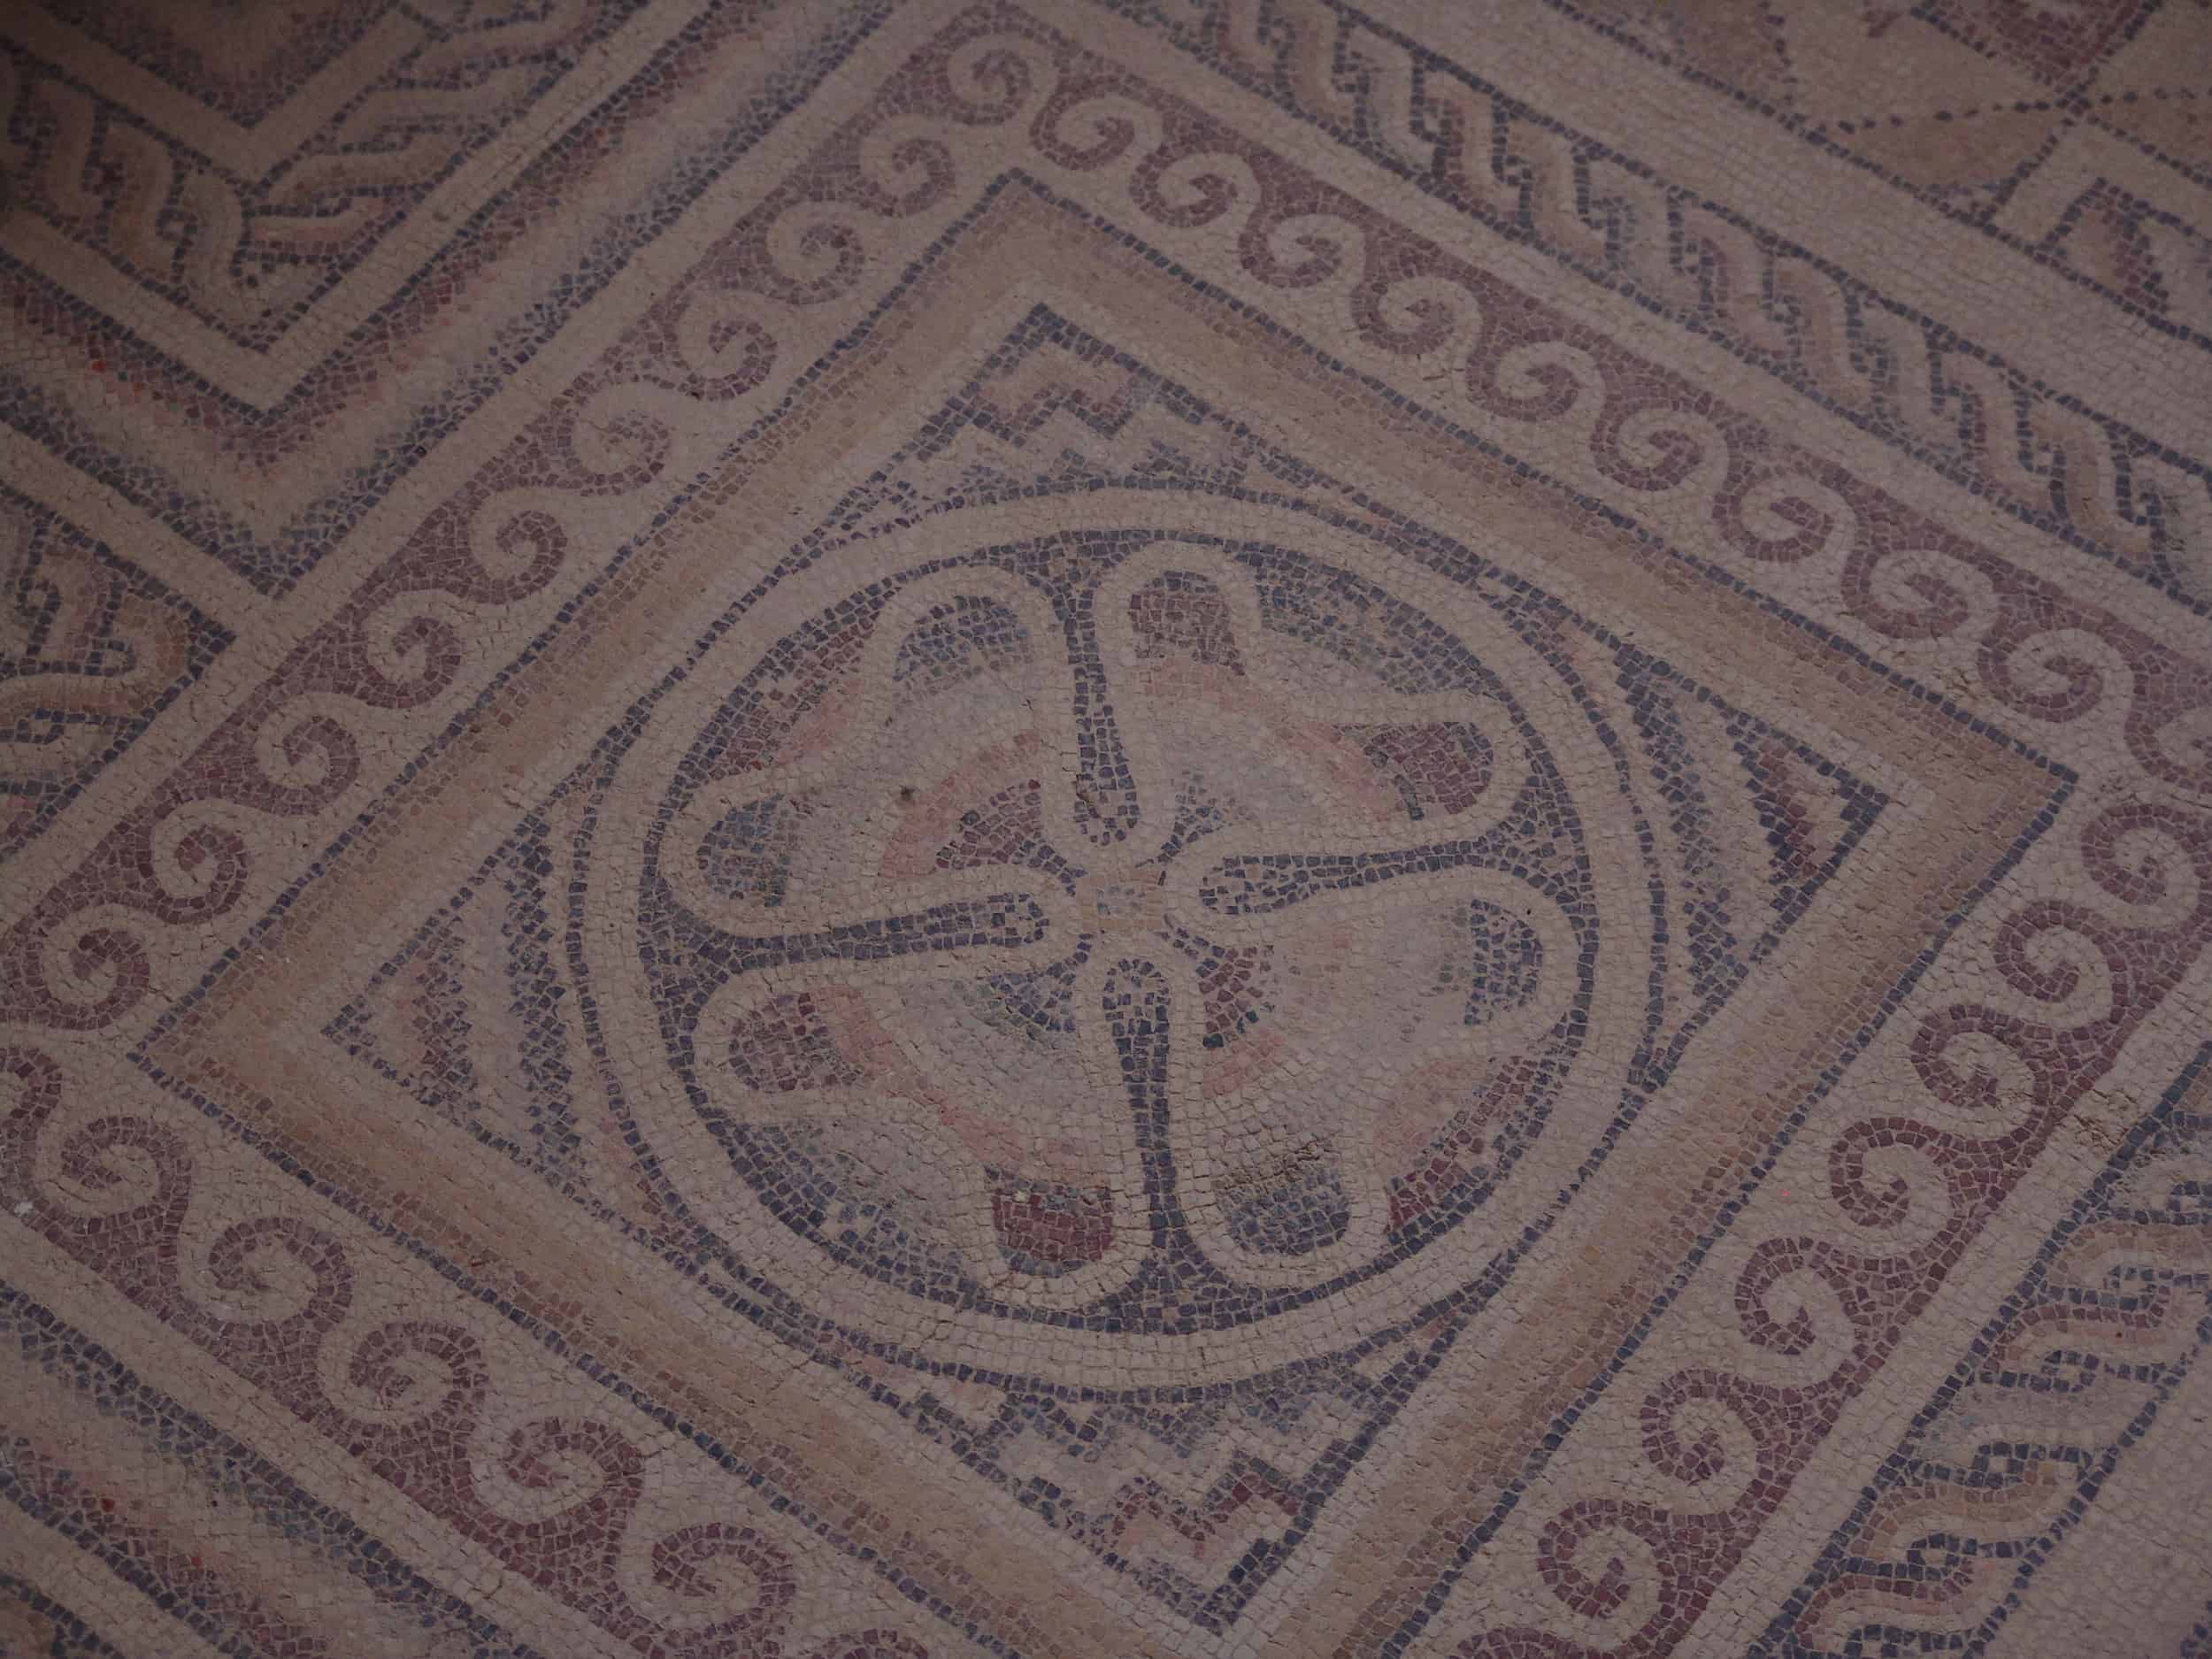 Detail on the mosaic in the main room of the council chamber